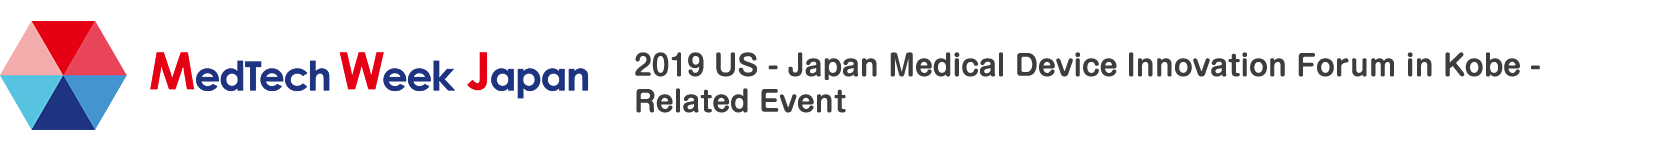 2019 US - Japan Medical Device Innovation Forum in Kobe - Related Event